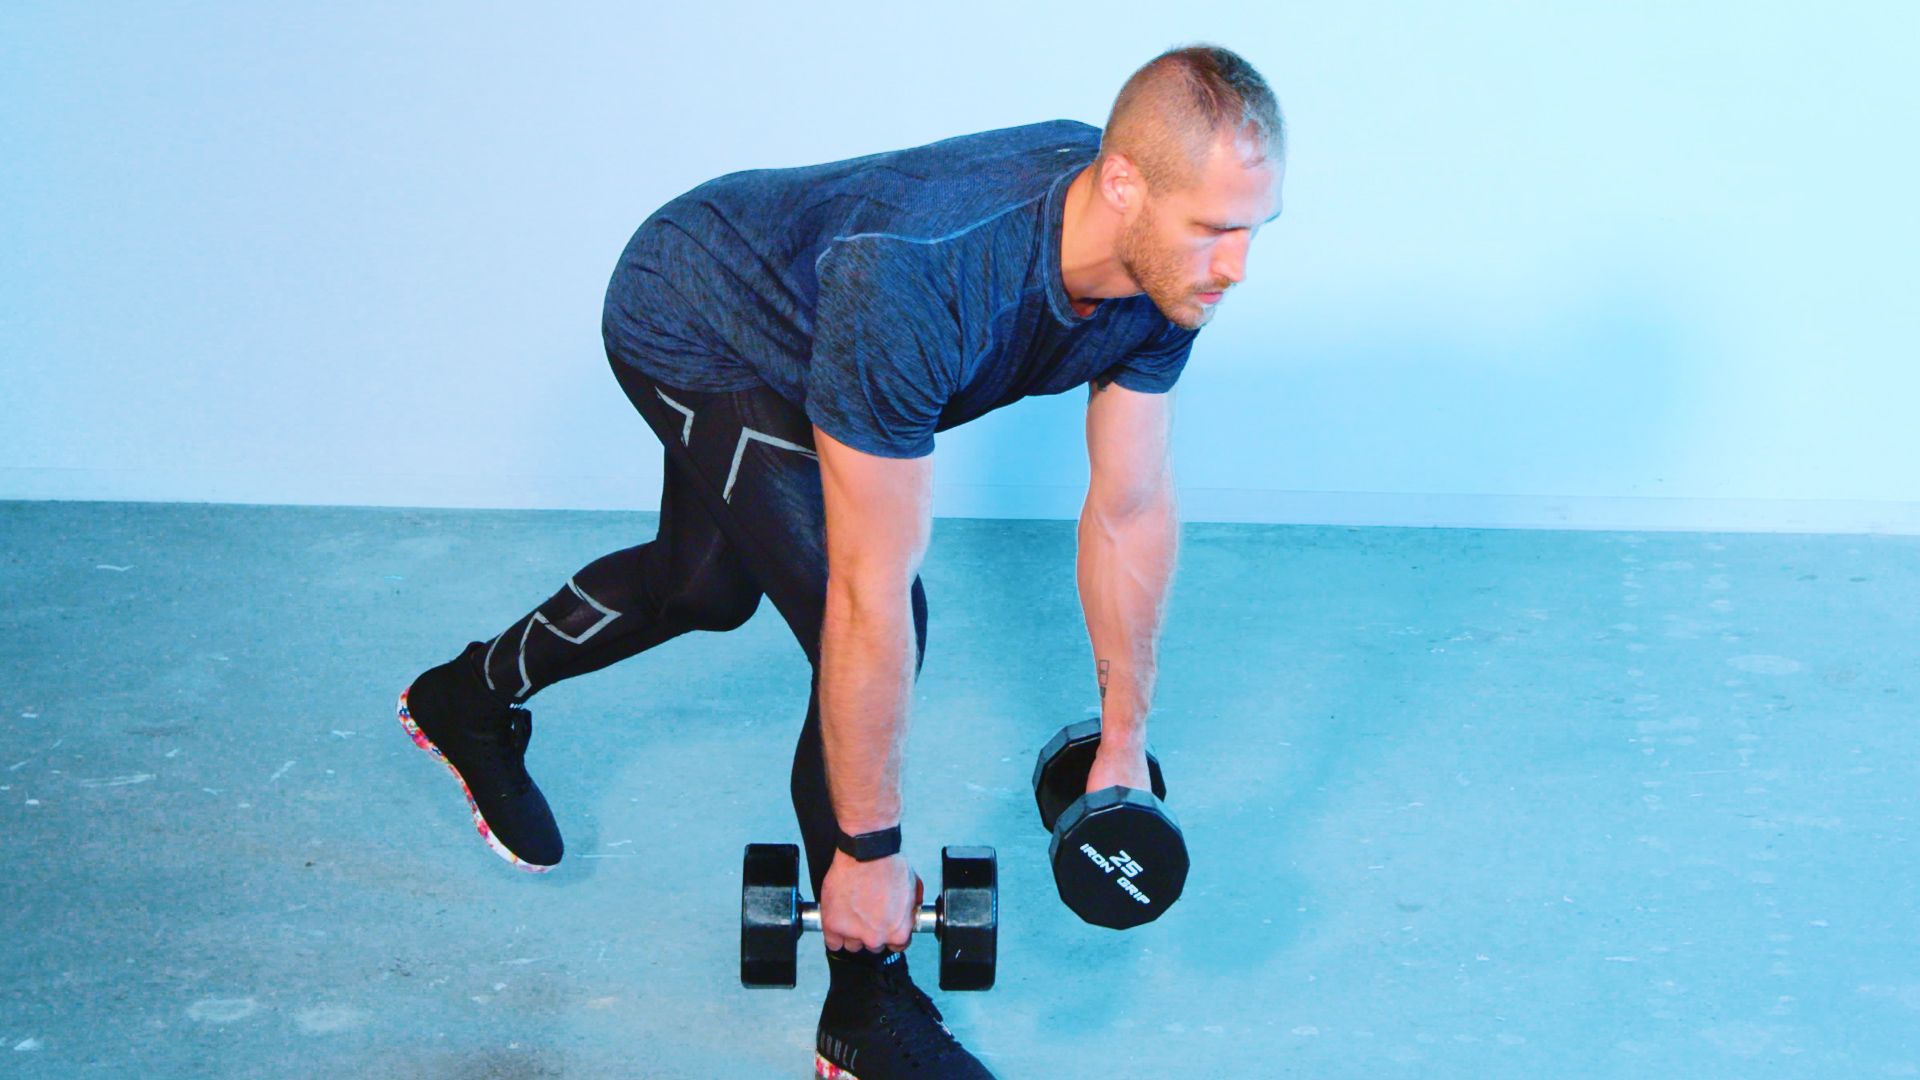 How the Single-Leg Deadlift Exercise Can Build Your Hamstrings